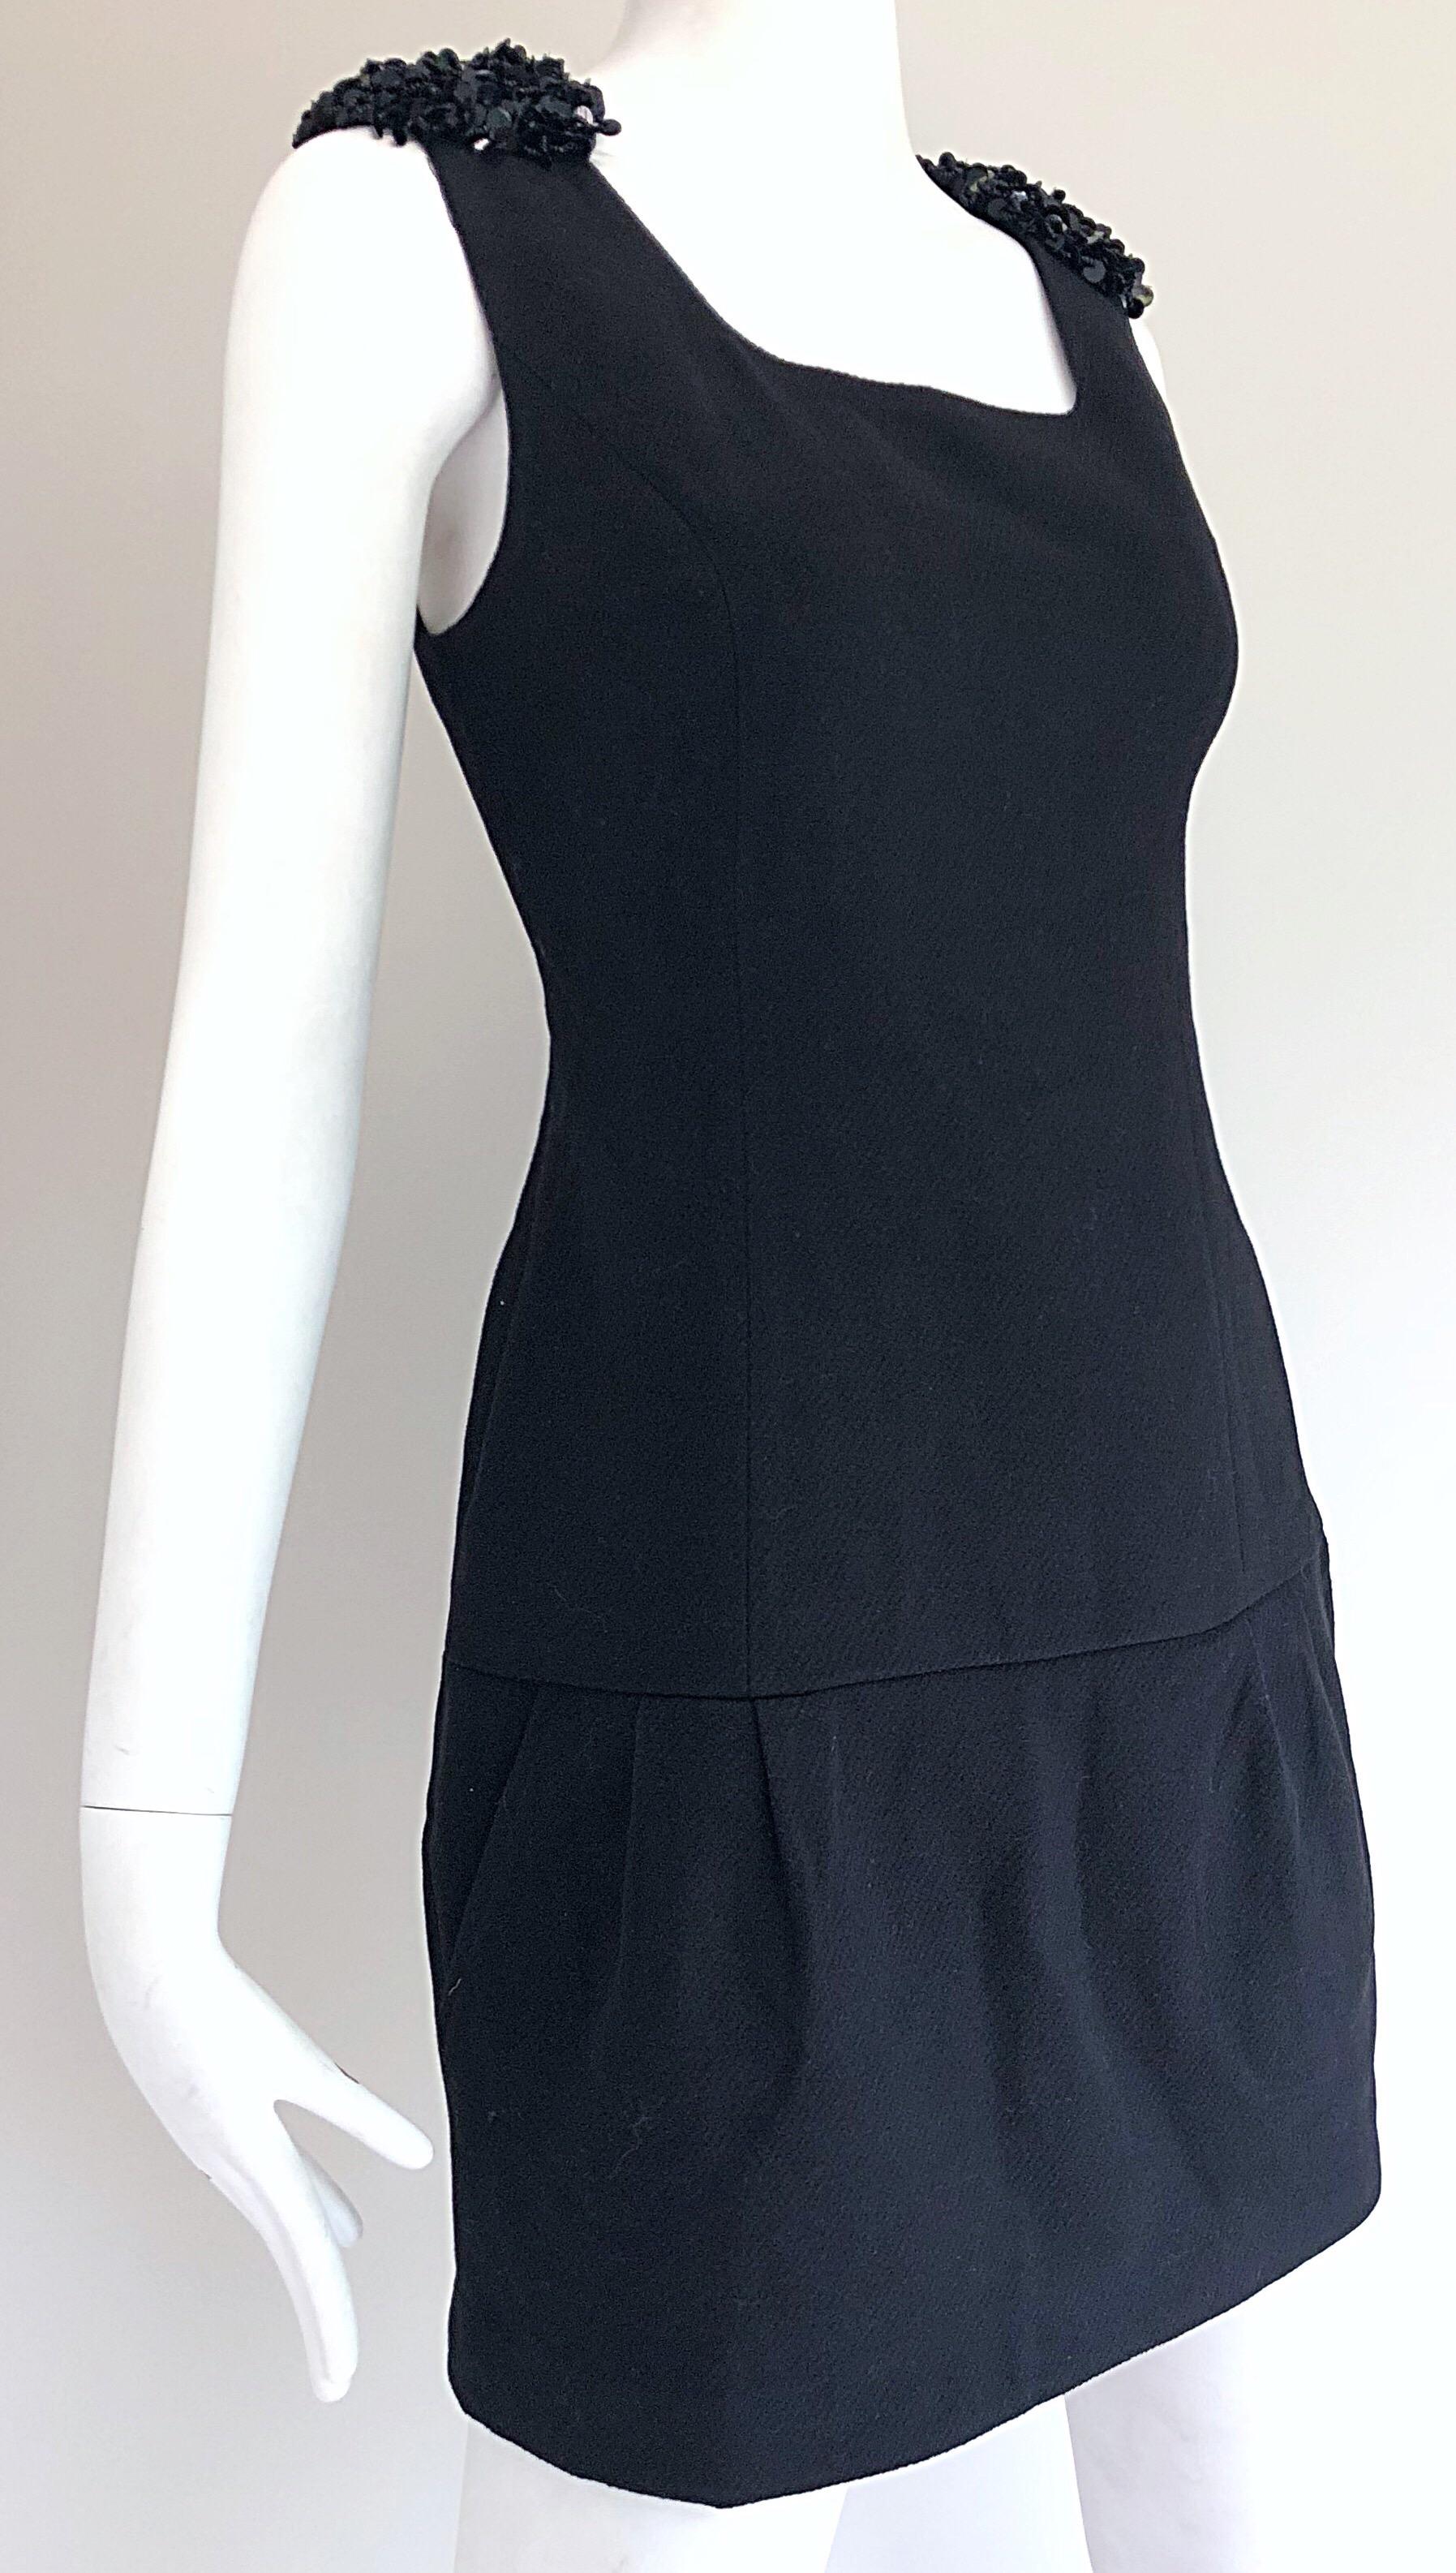 1990s Miu Miu Black Virgin Wool Sequin Beaded Vintage 90s Mini Dress In Excellent Condition For Sale In San Diego, CA